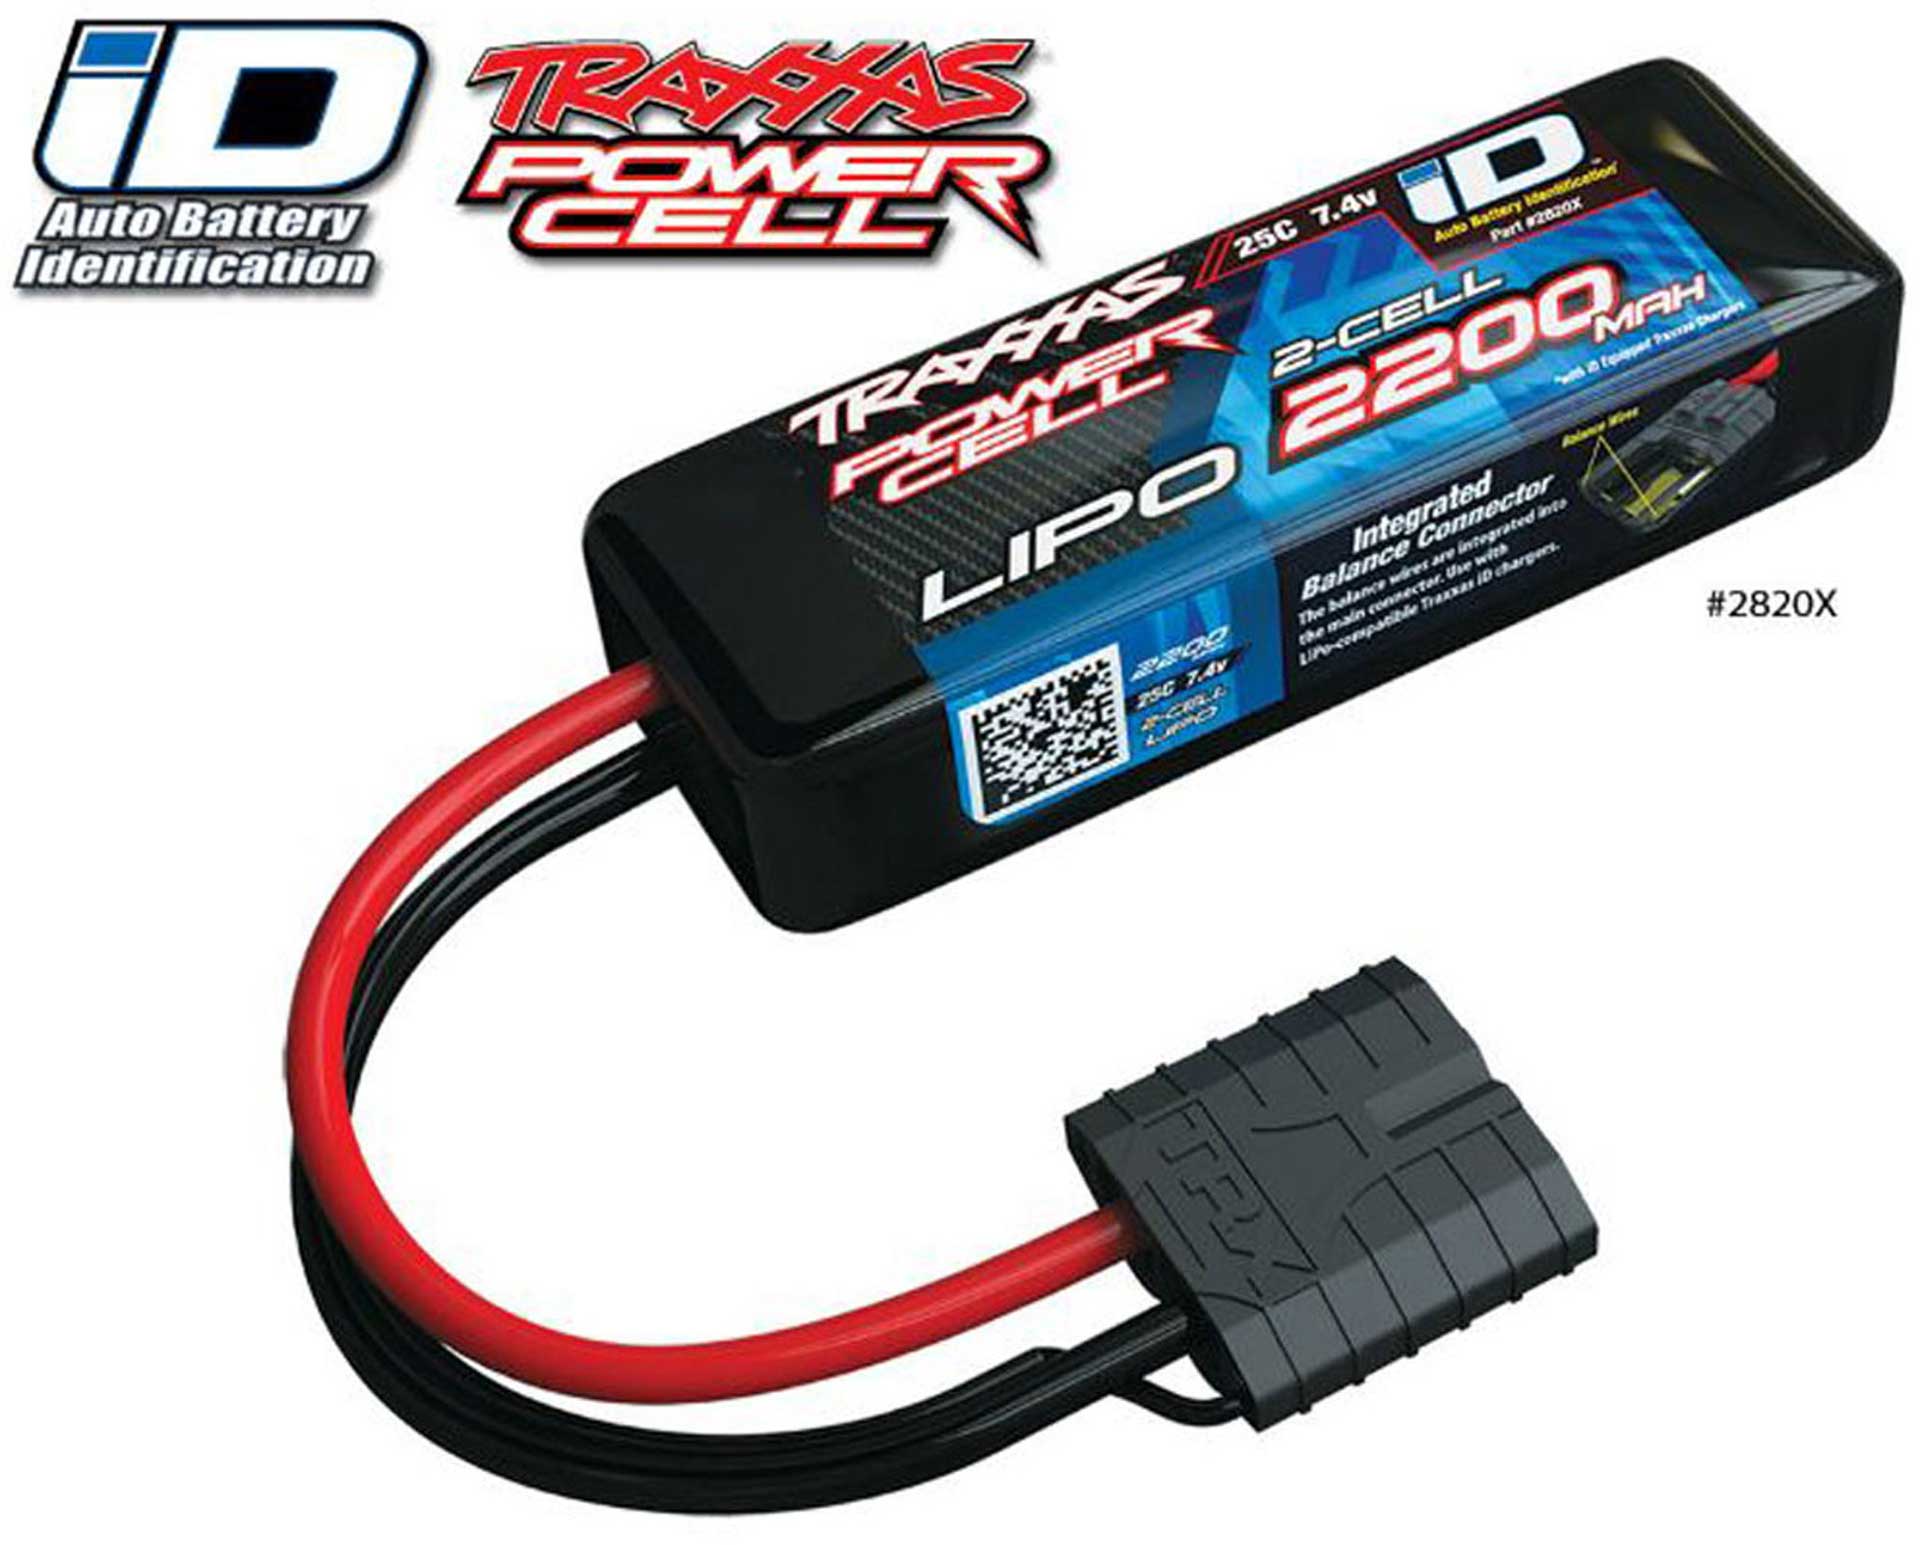 TRAXXAS 2200 MAH 7,4 VOLT 2S 25C LIPO BATTERY PACK WITH ID-PLUG